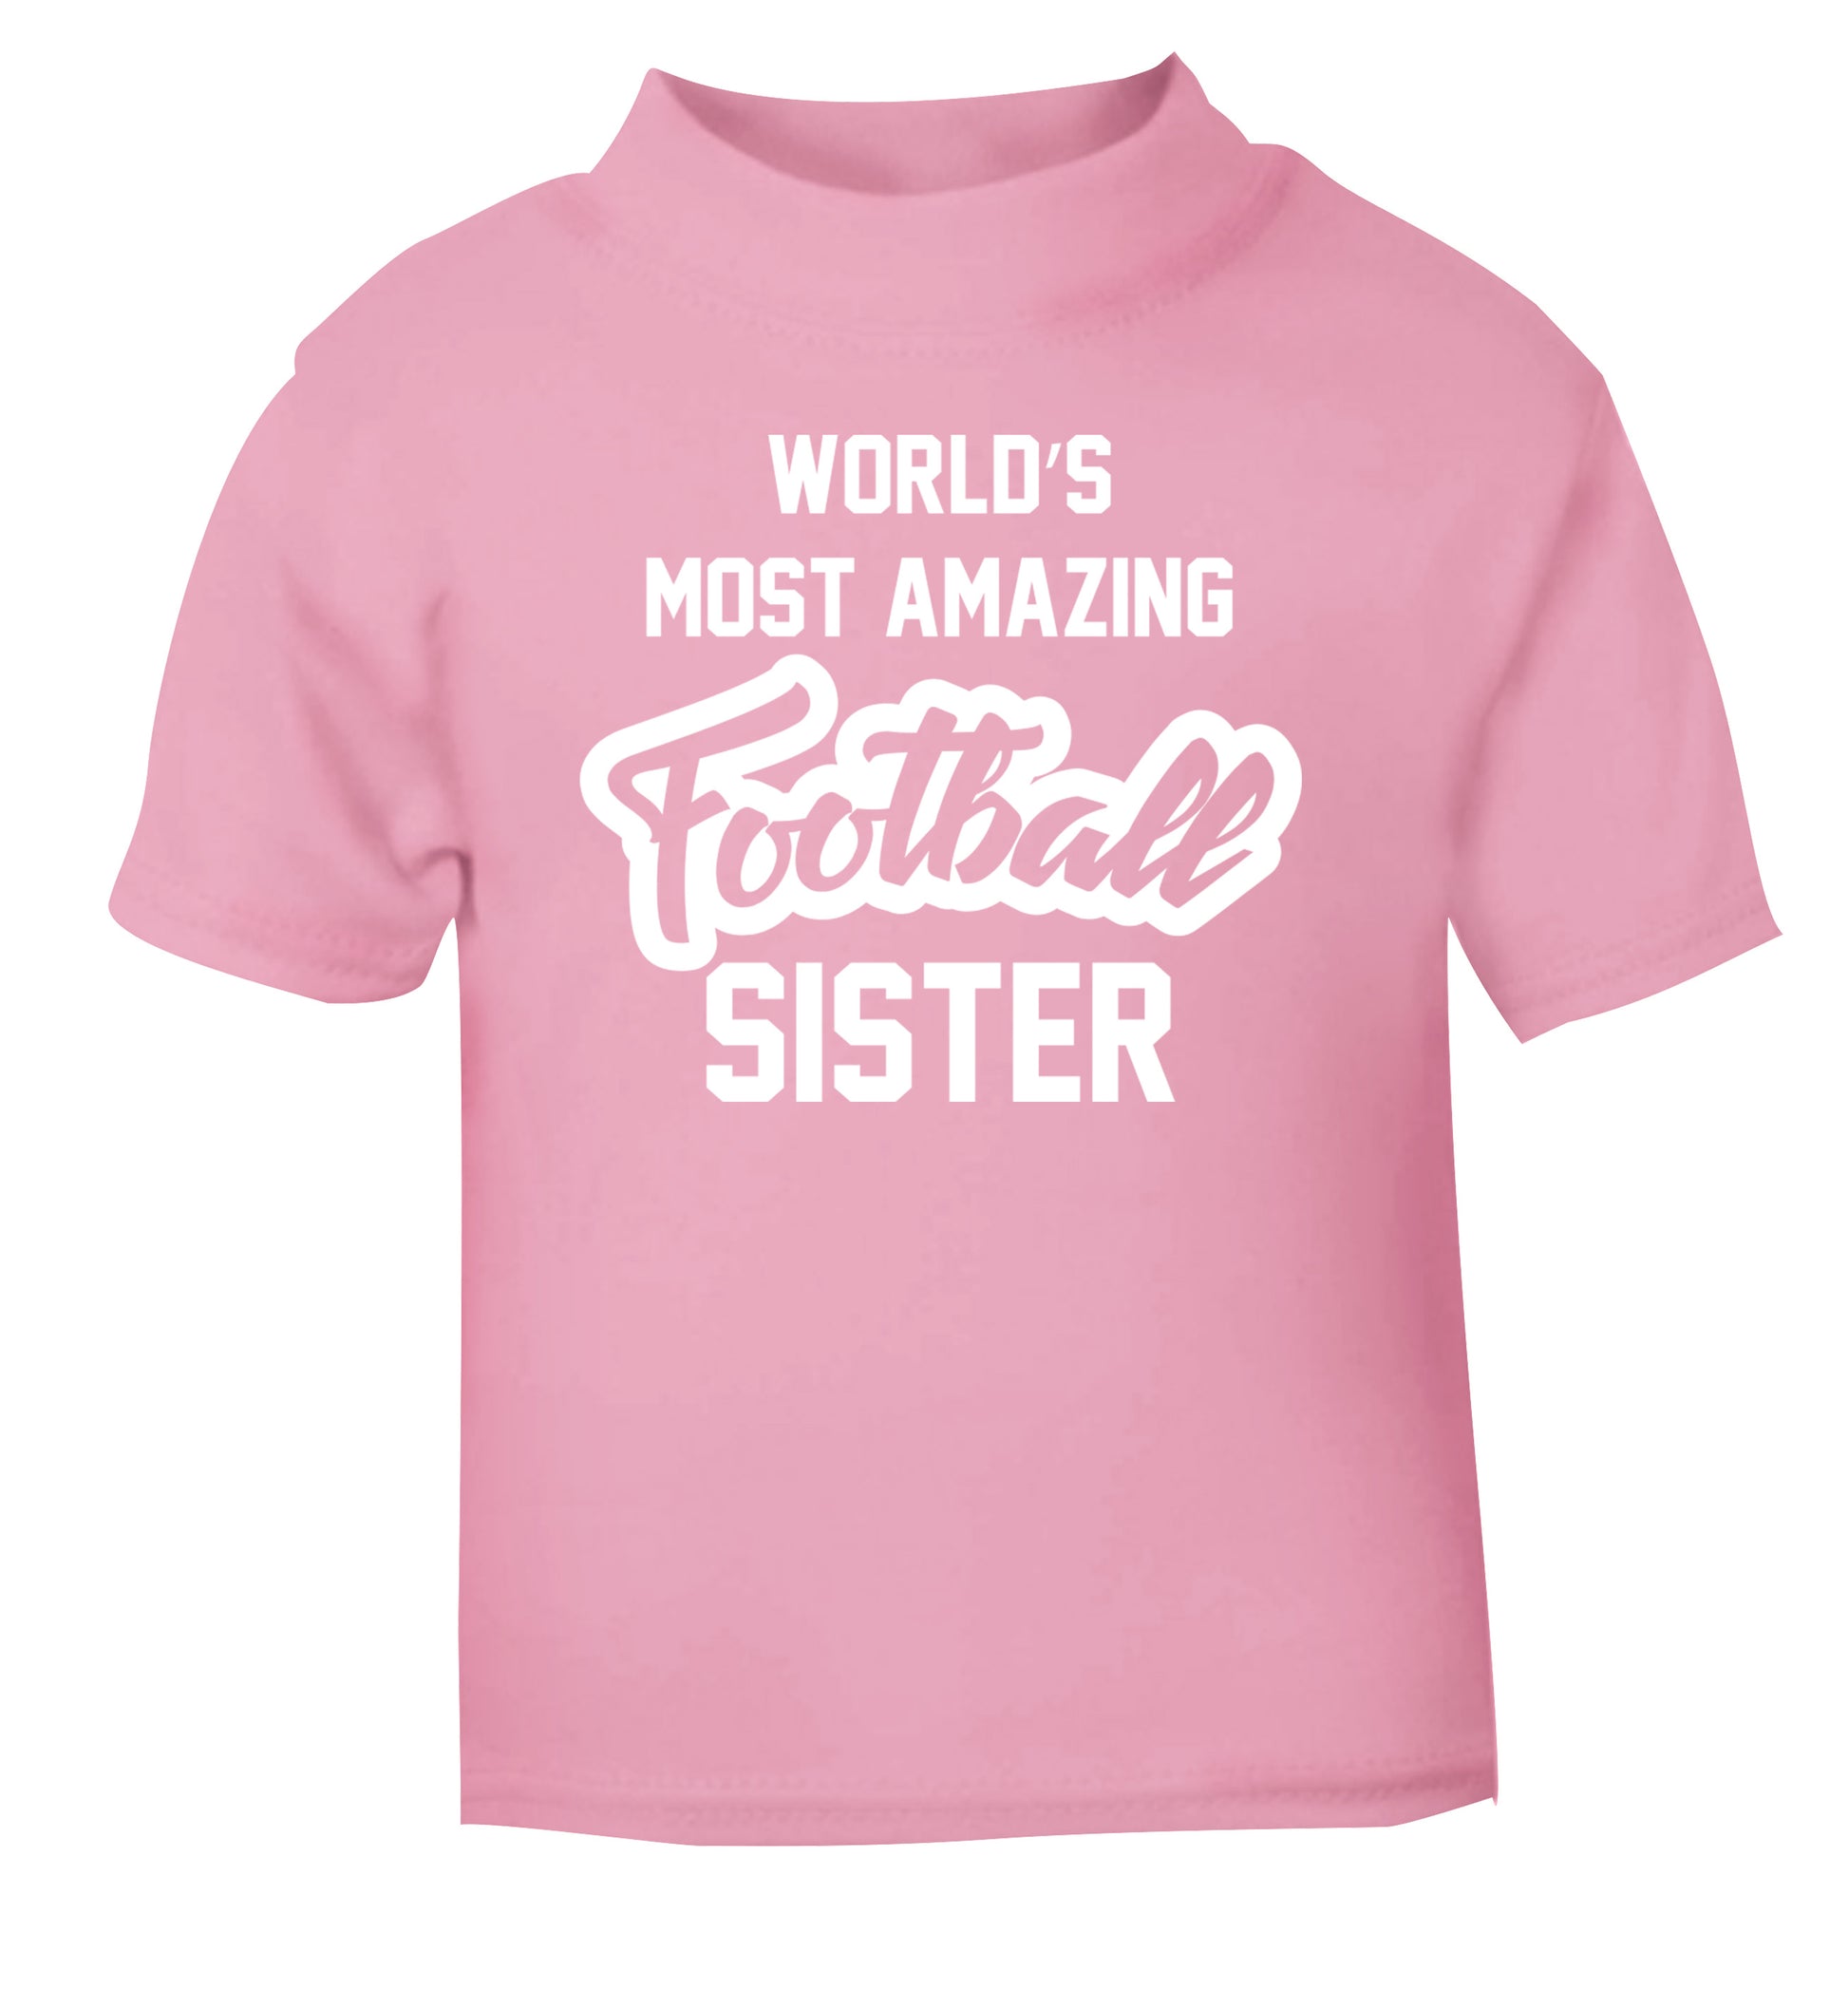 Worlds most amazing football sister light pink Baby Toddler Tshirt 2 Years